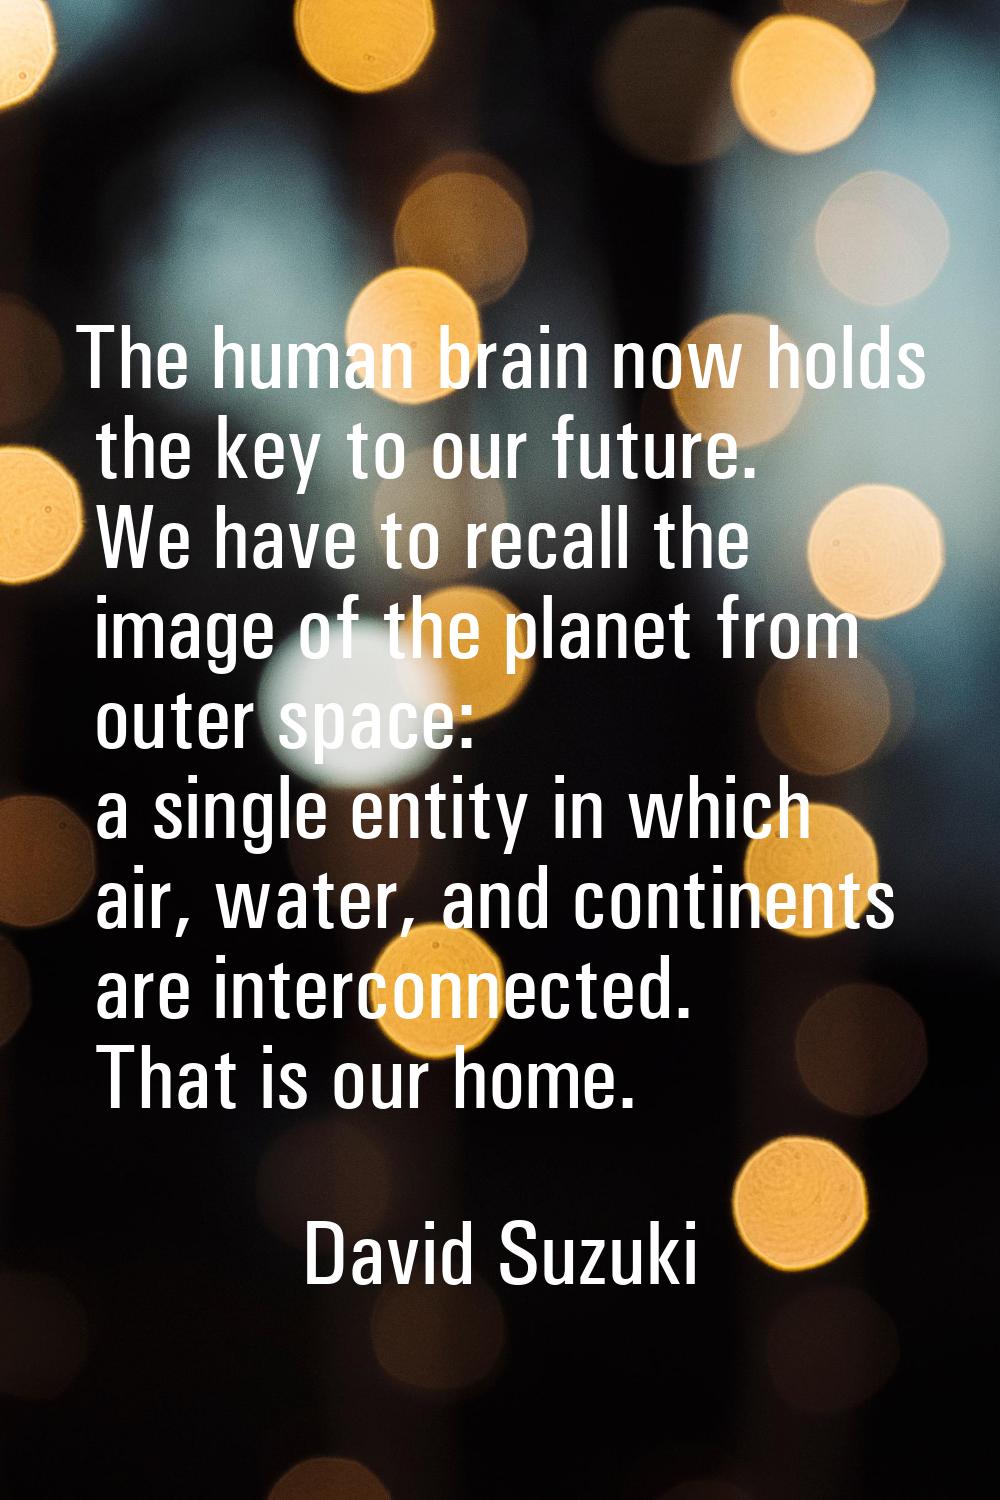 The human brain now holds the key to our future. We have to recall the image of the planet from out